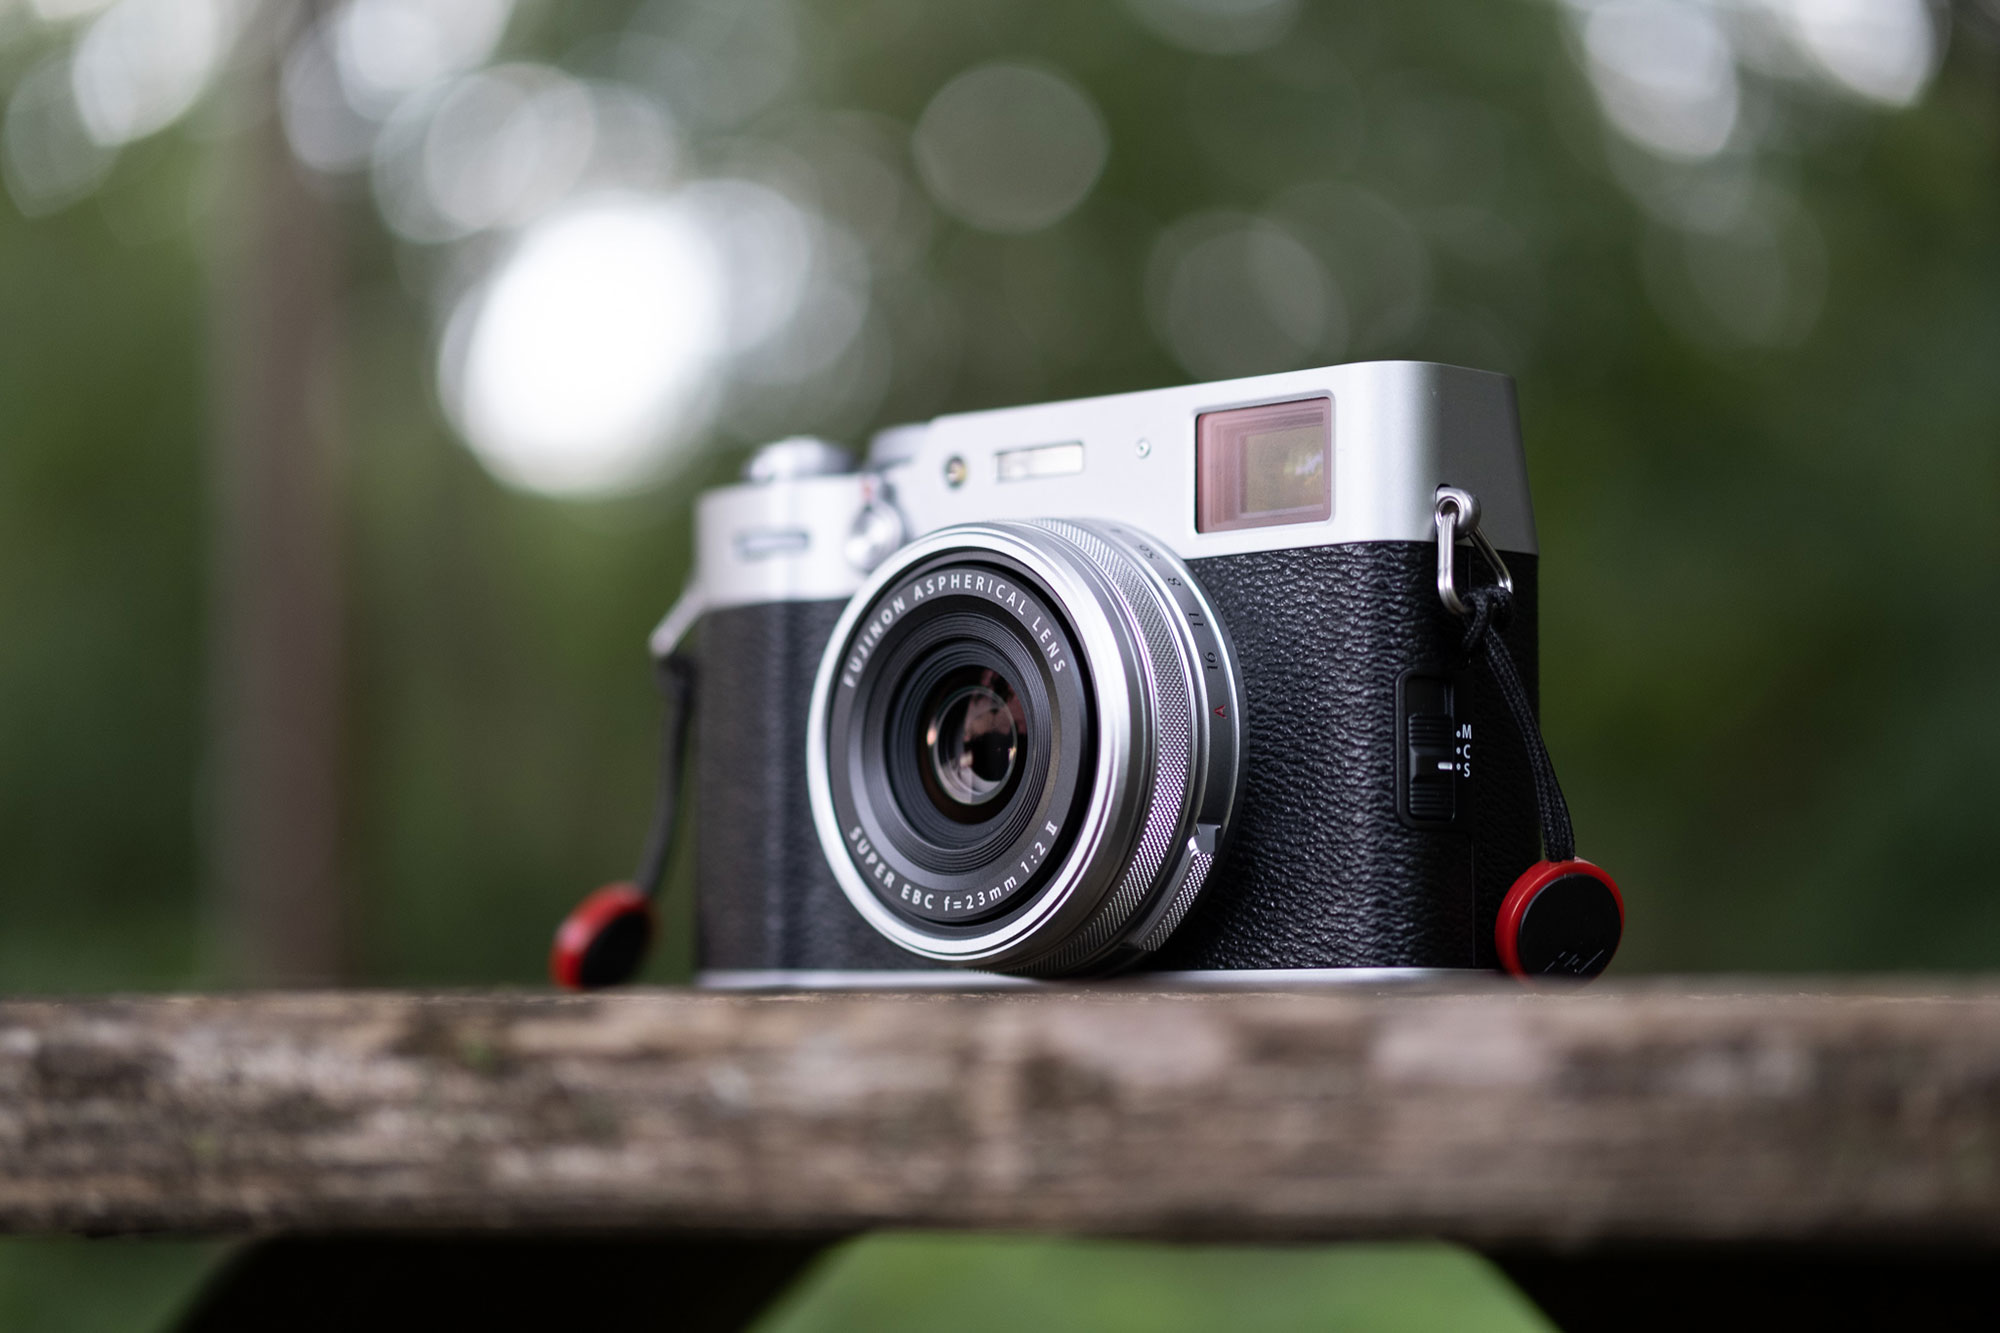 Embracing imperfection with the Fujifilm X100V: A photo walk at